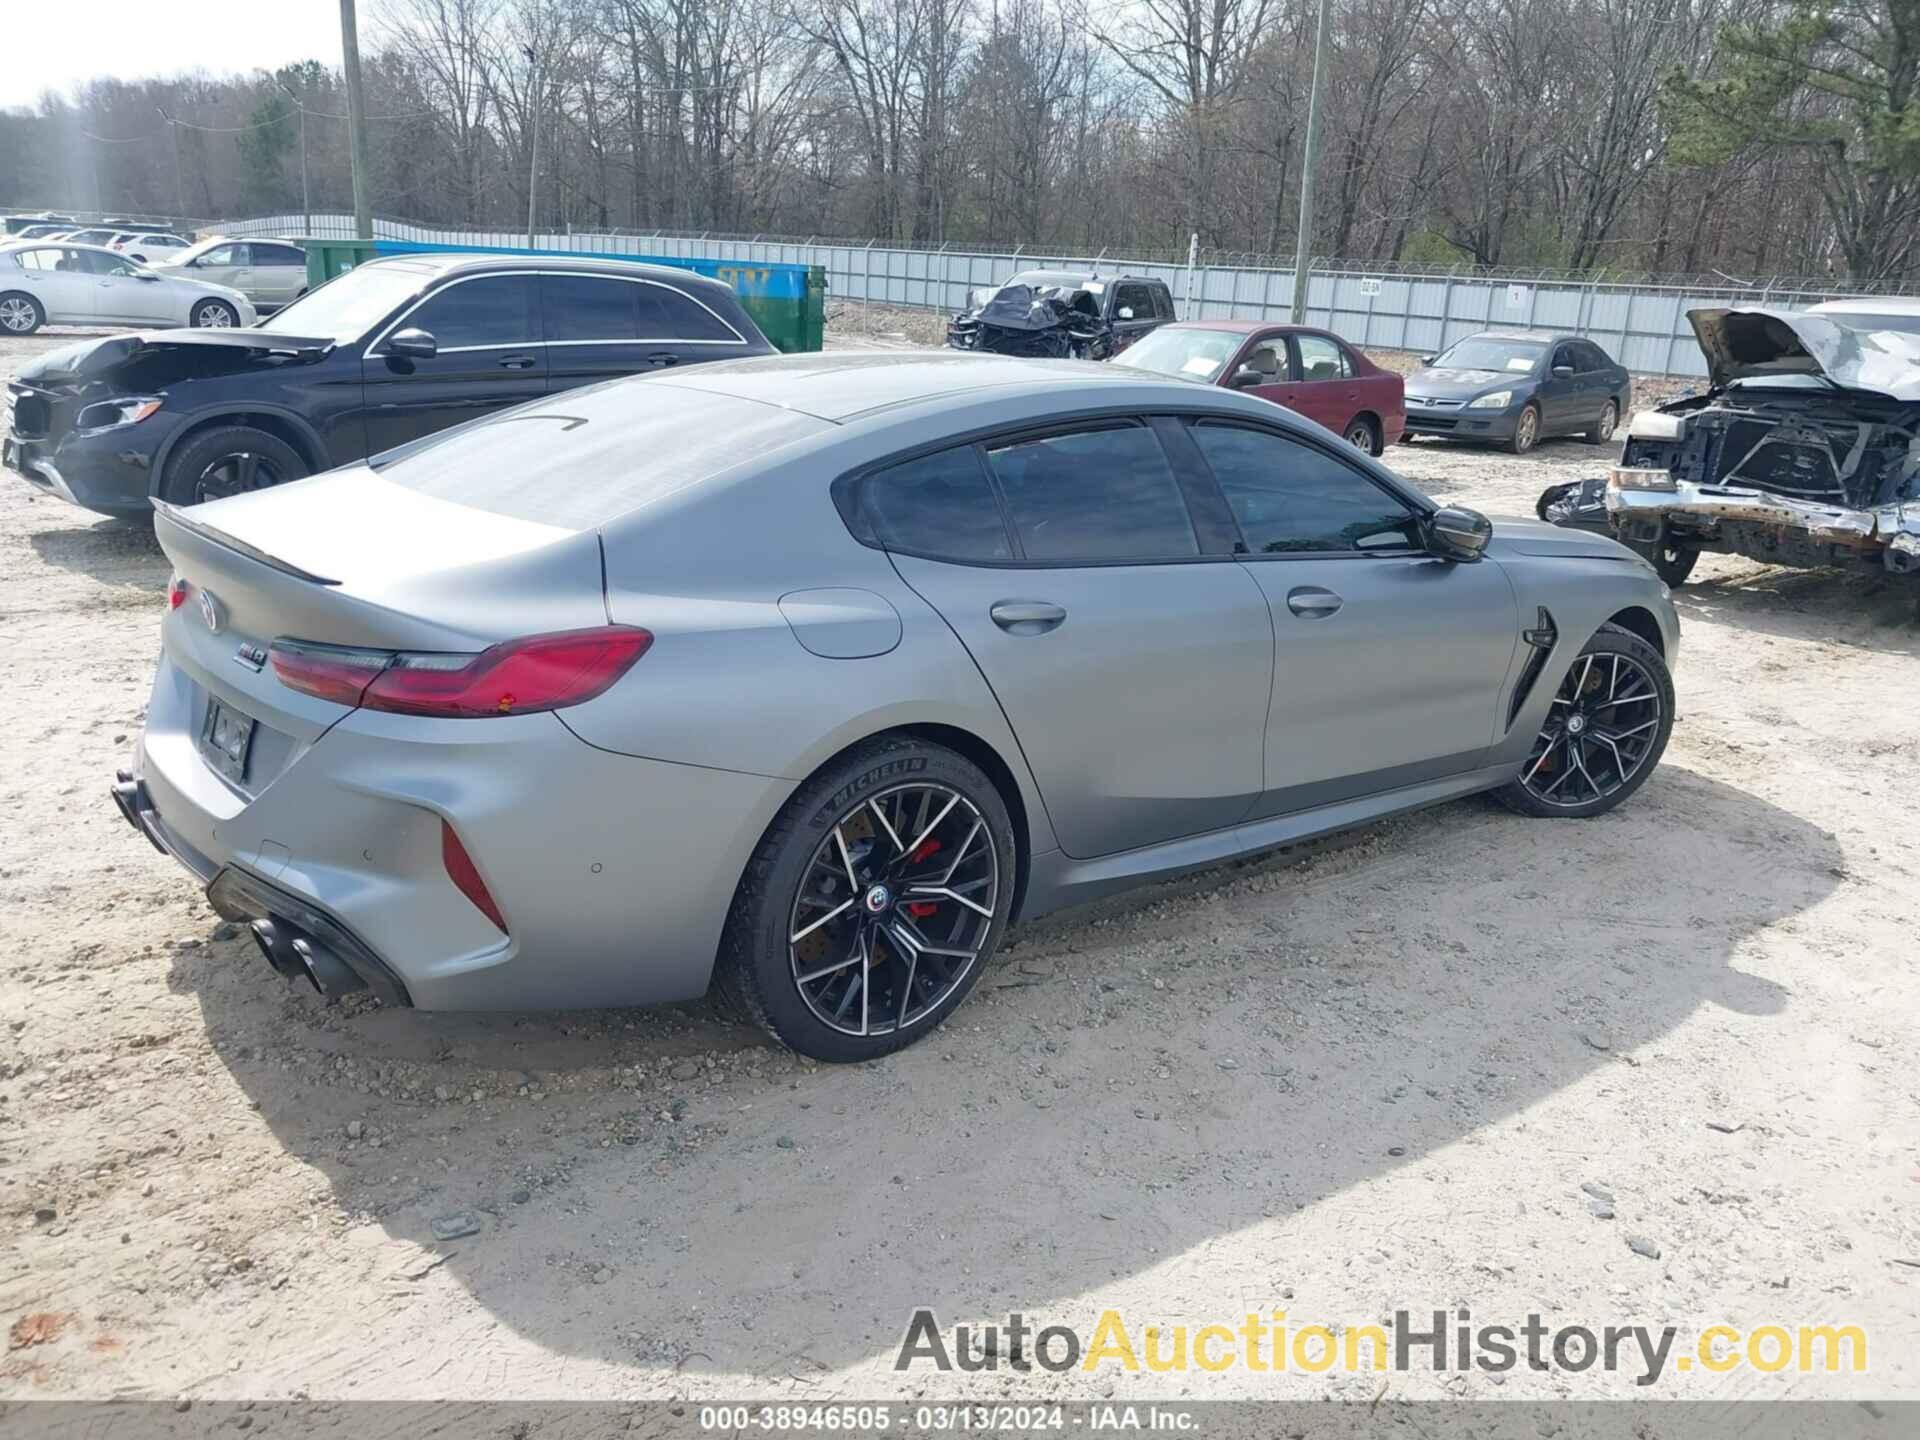 BMW M8 GRAN COUPE COMPETITION, WBSGV0C0XPCL14283